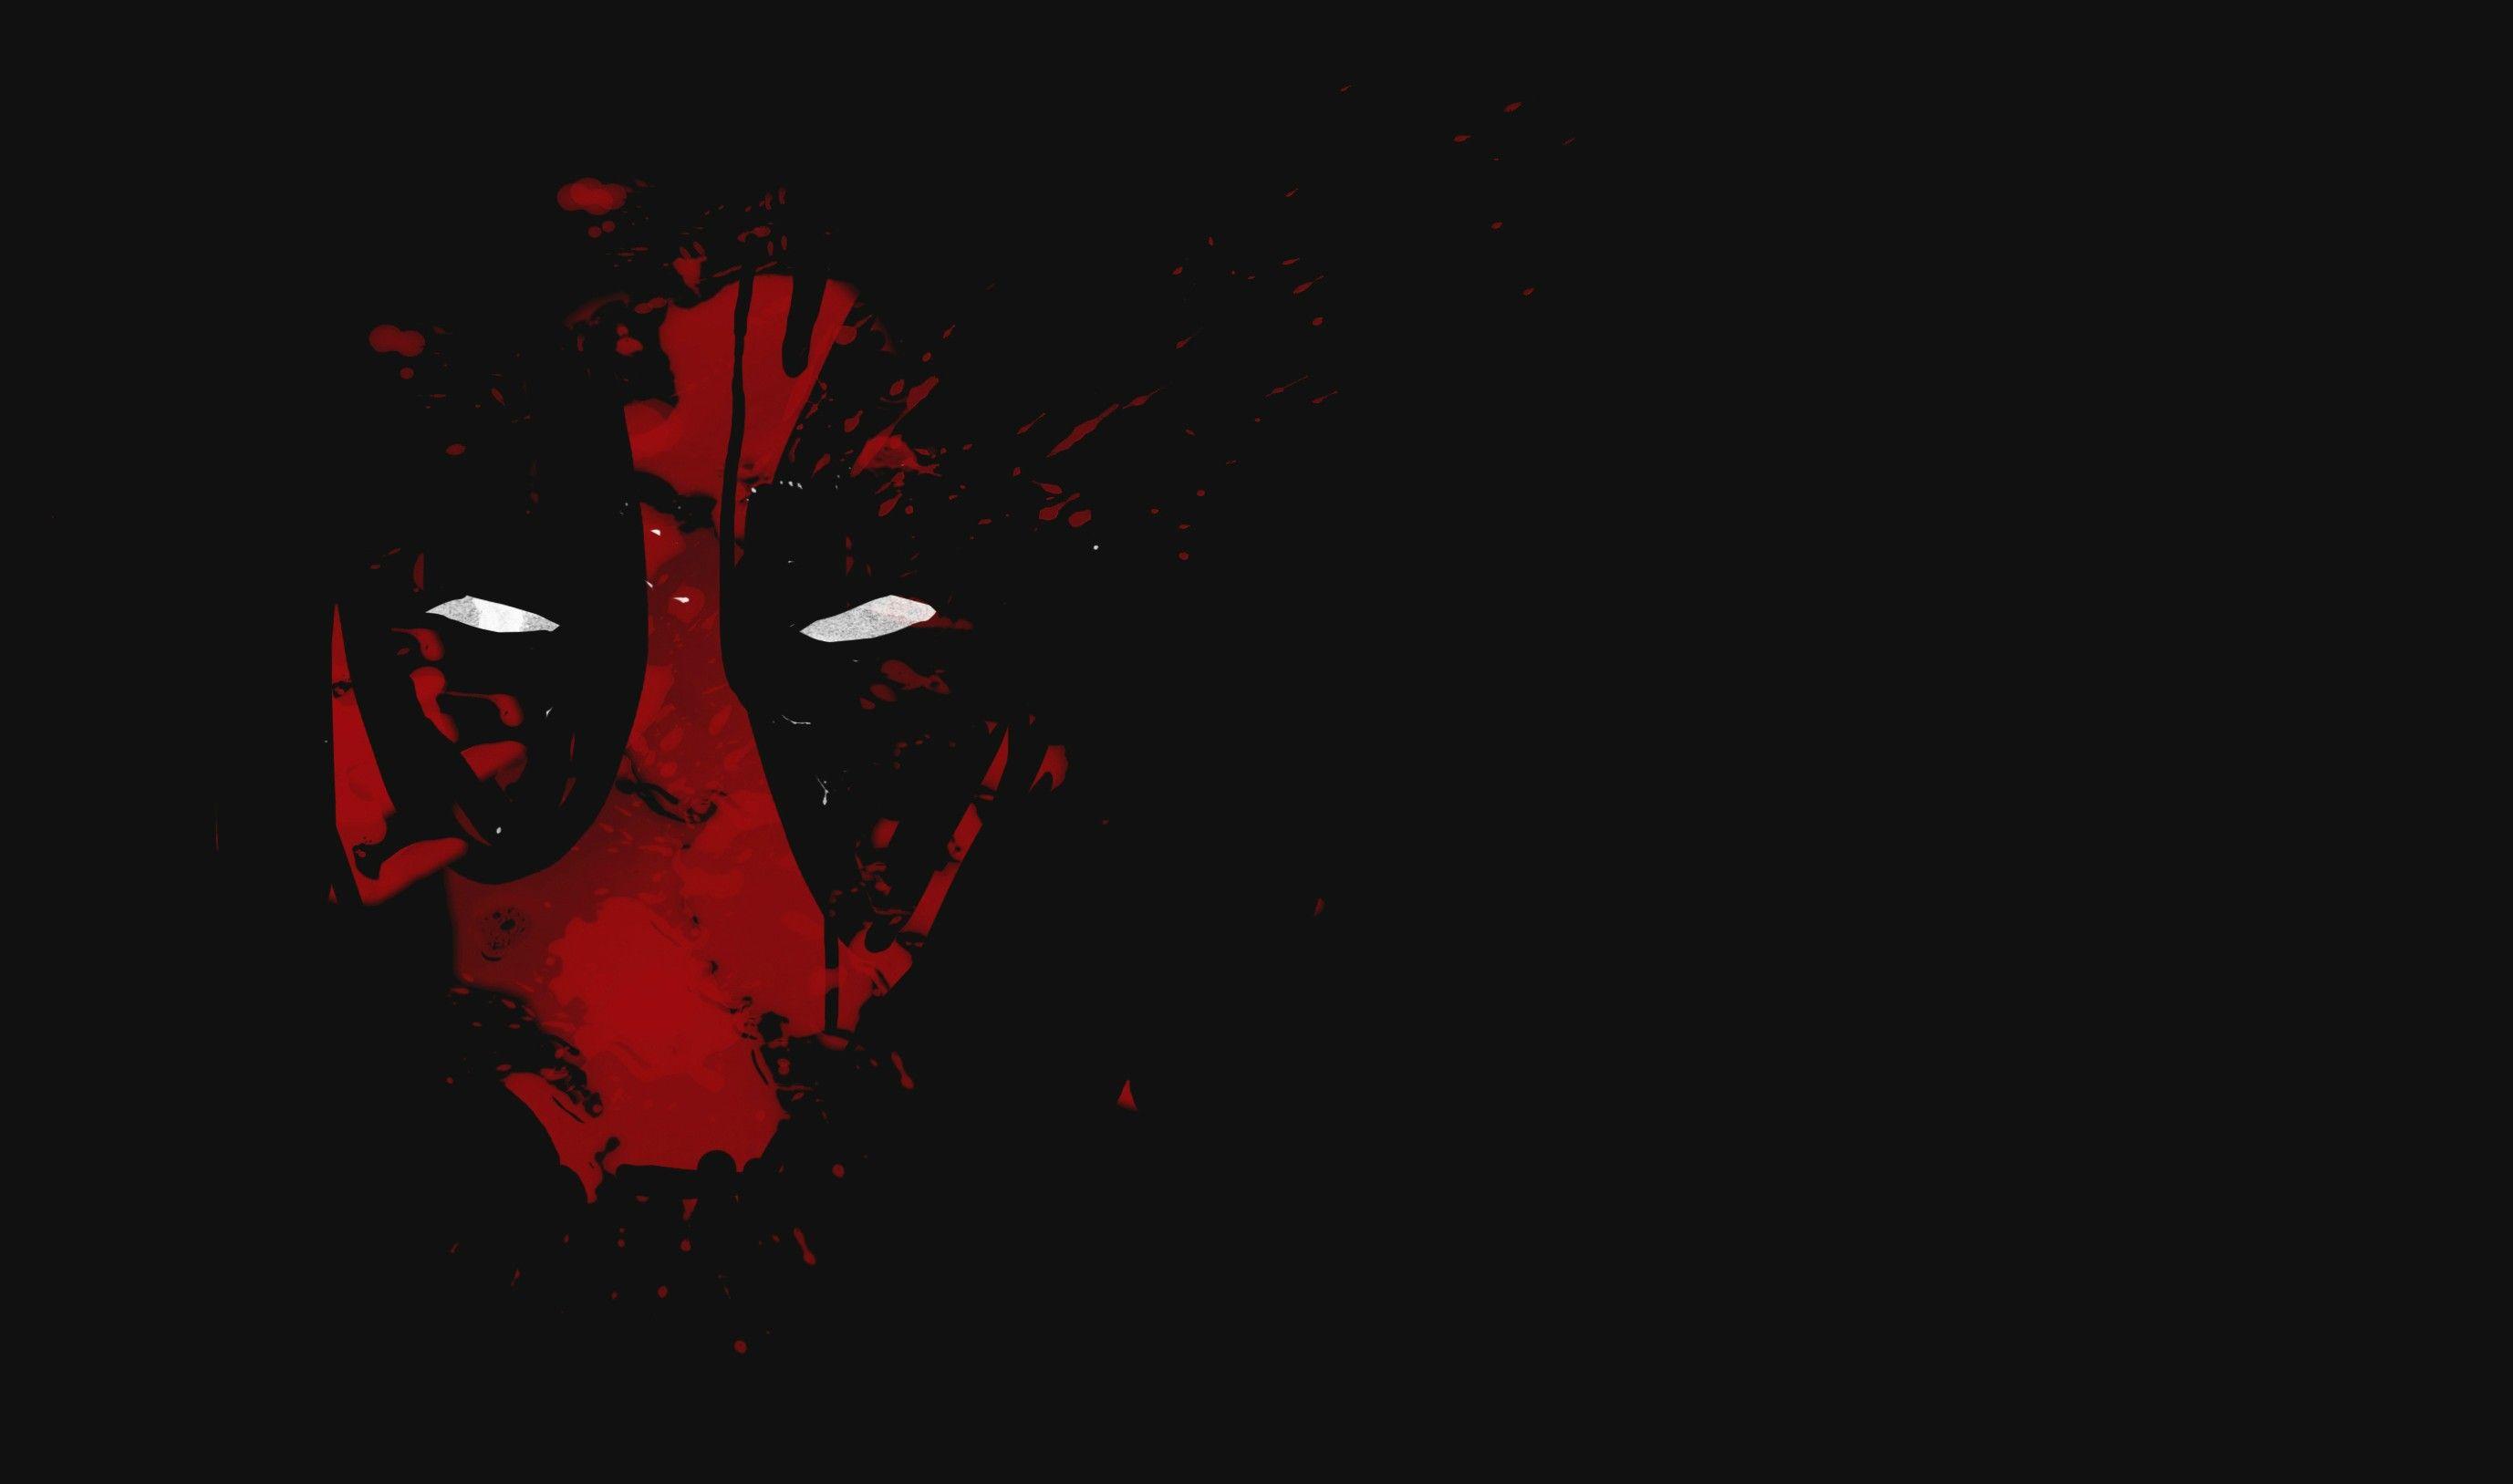 Cool Deadpool Wallpaper with Red Abstract Mask with White Eyes